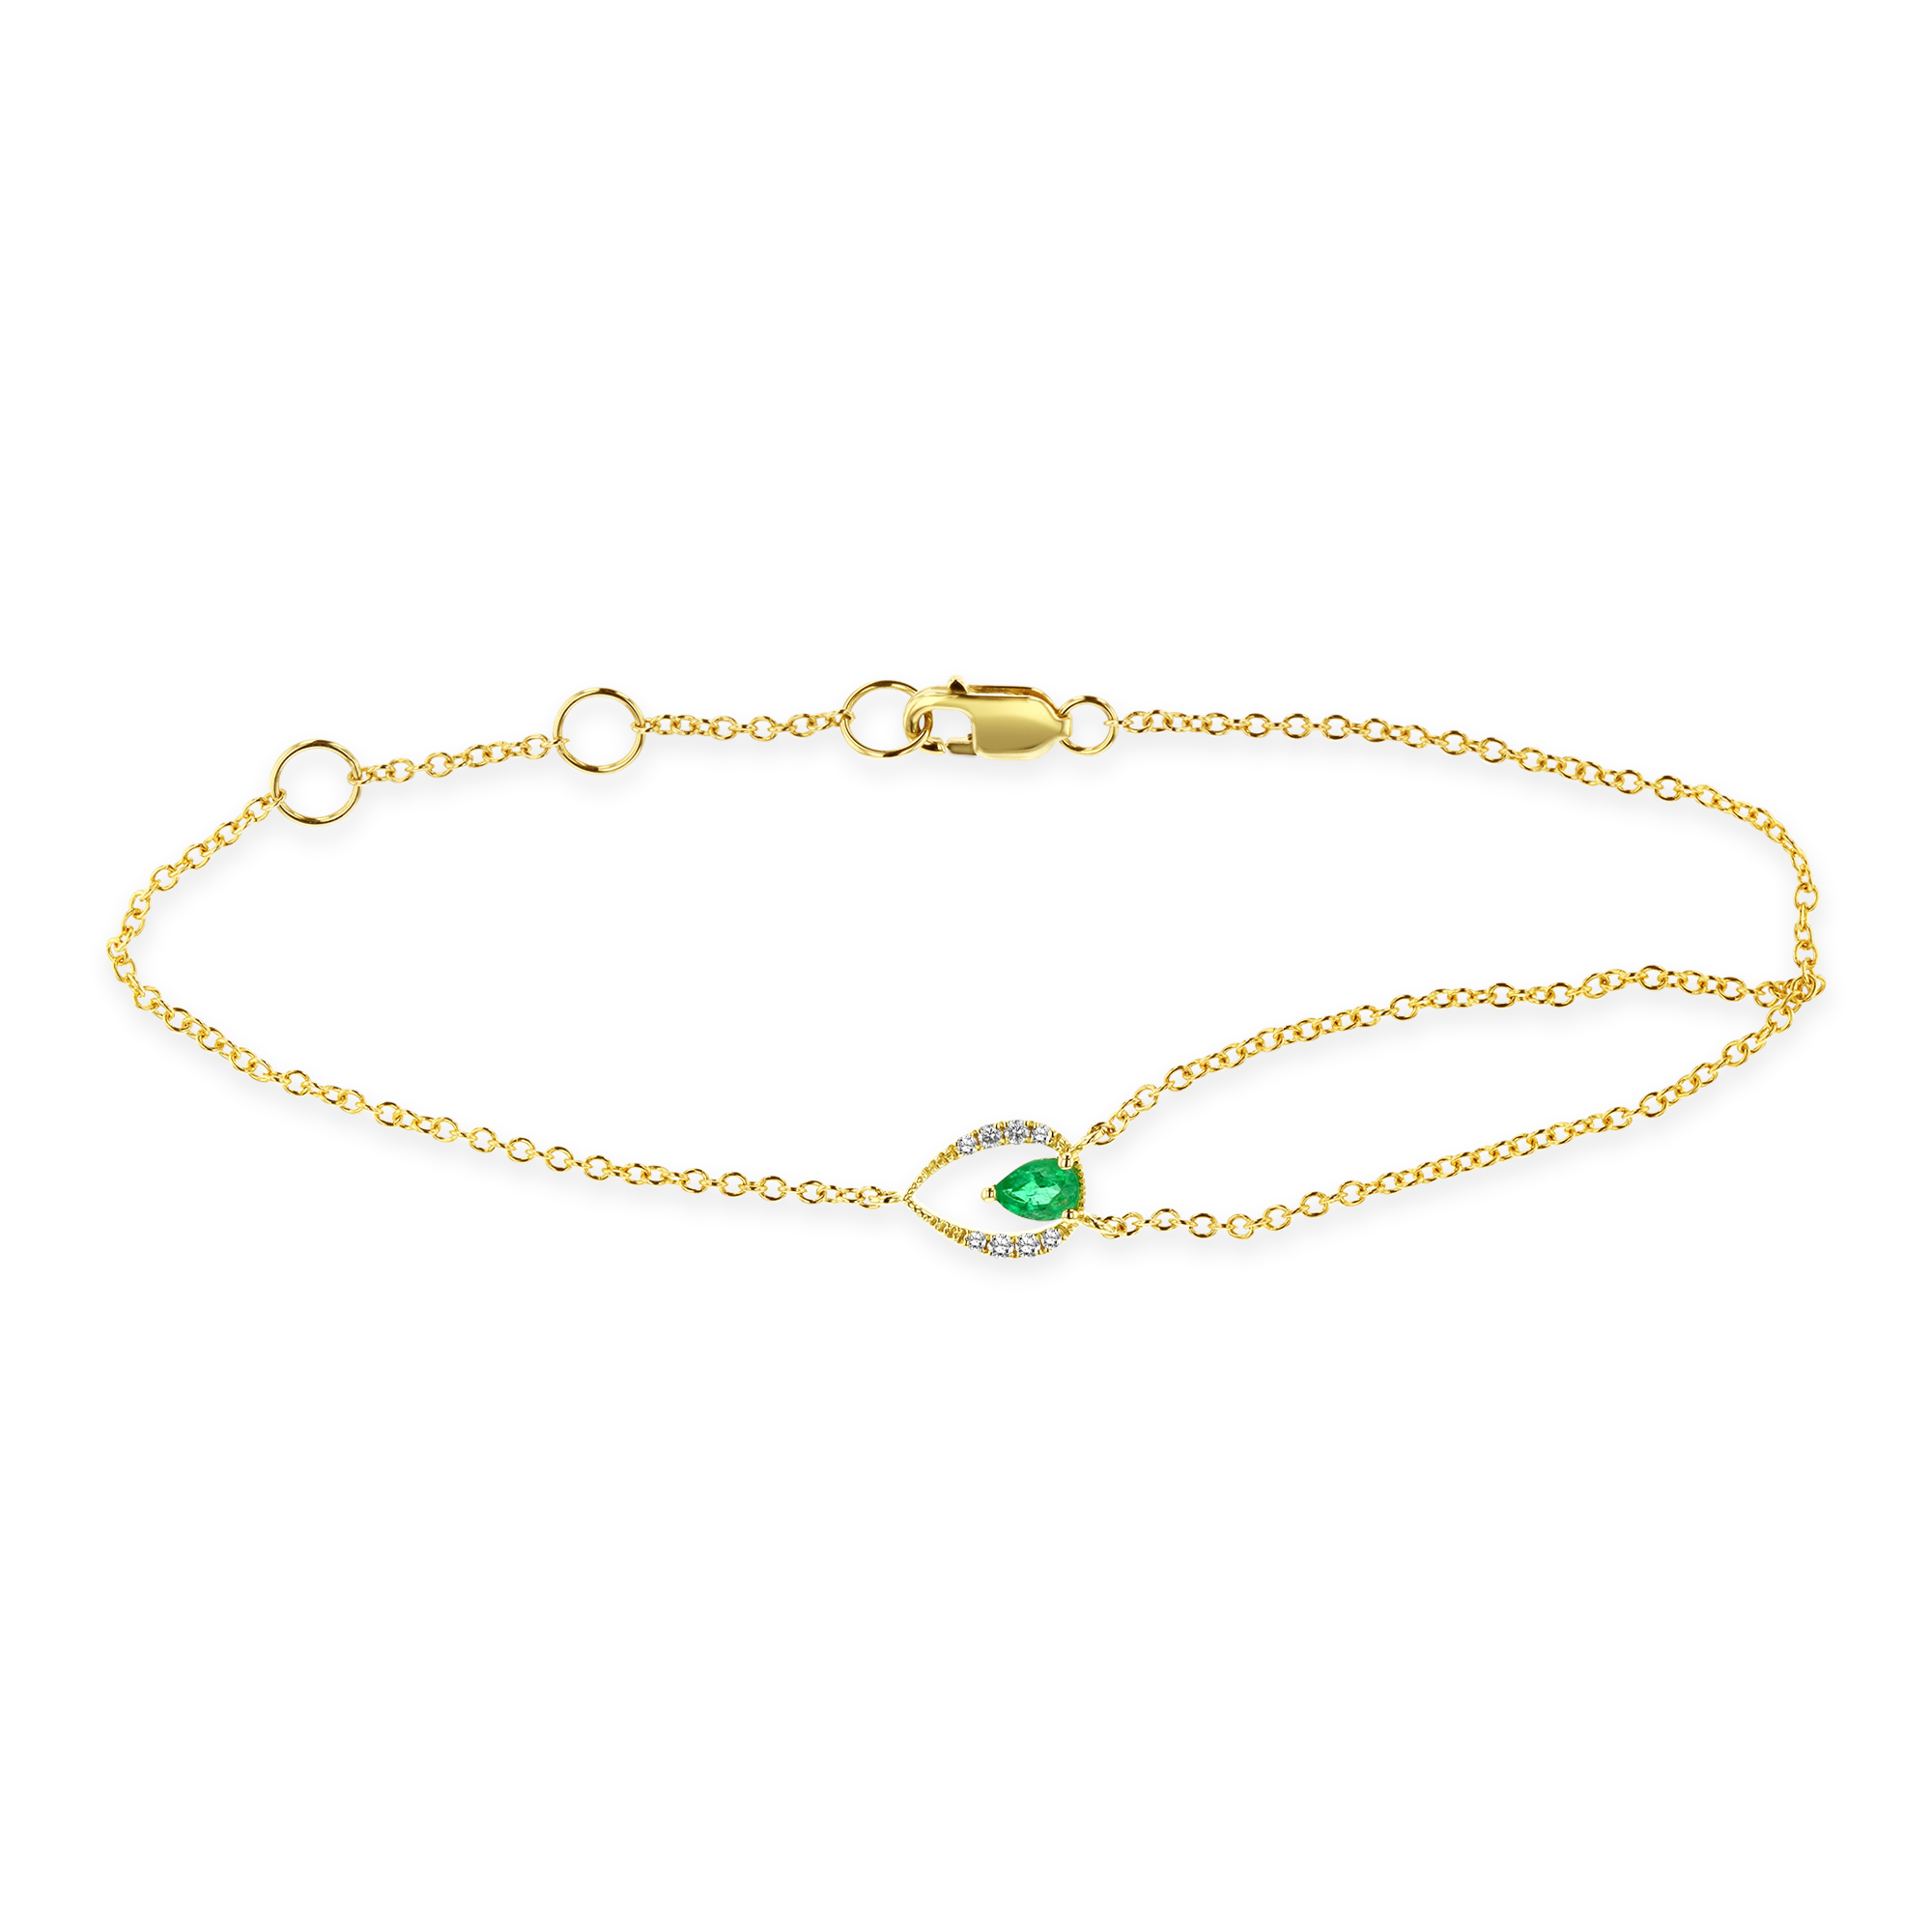 View 0.05ctw Diamond and Emerald Bracelet in 14k Gold